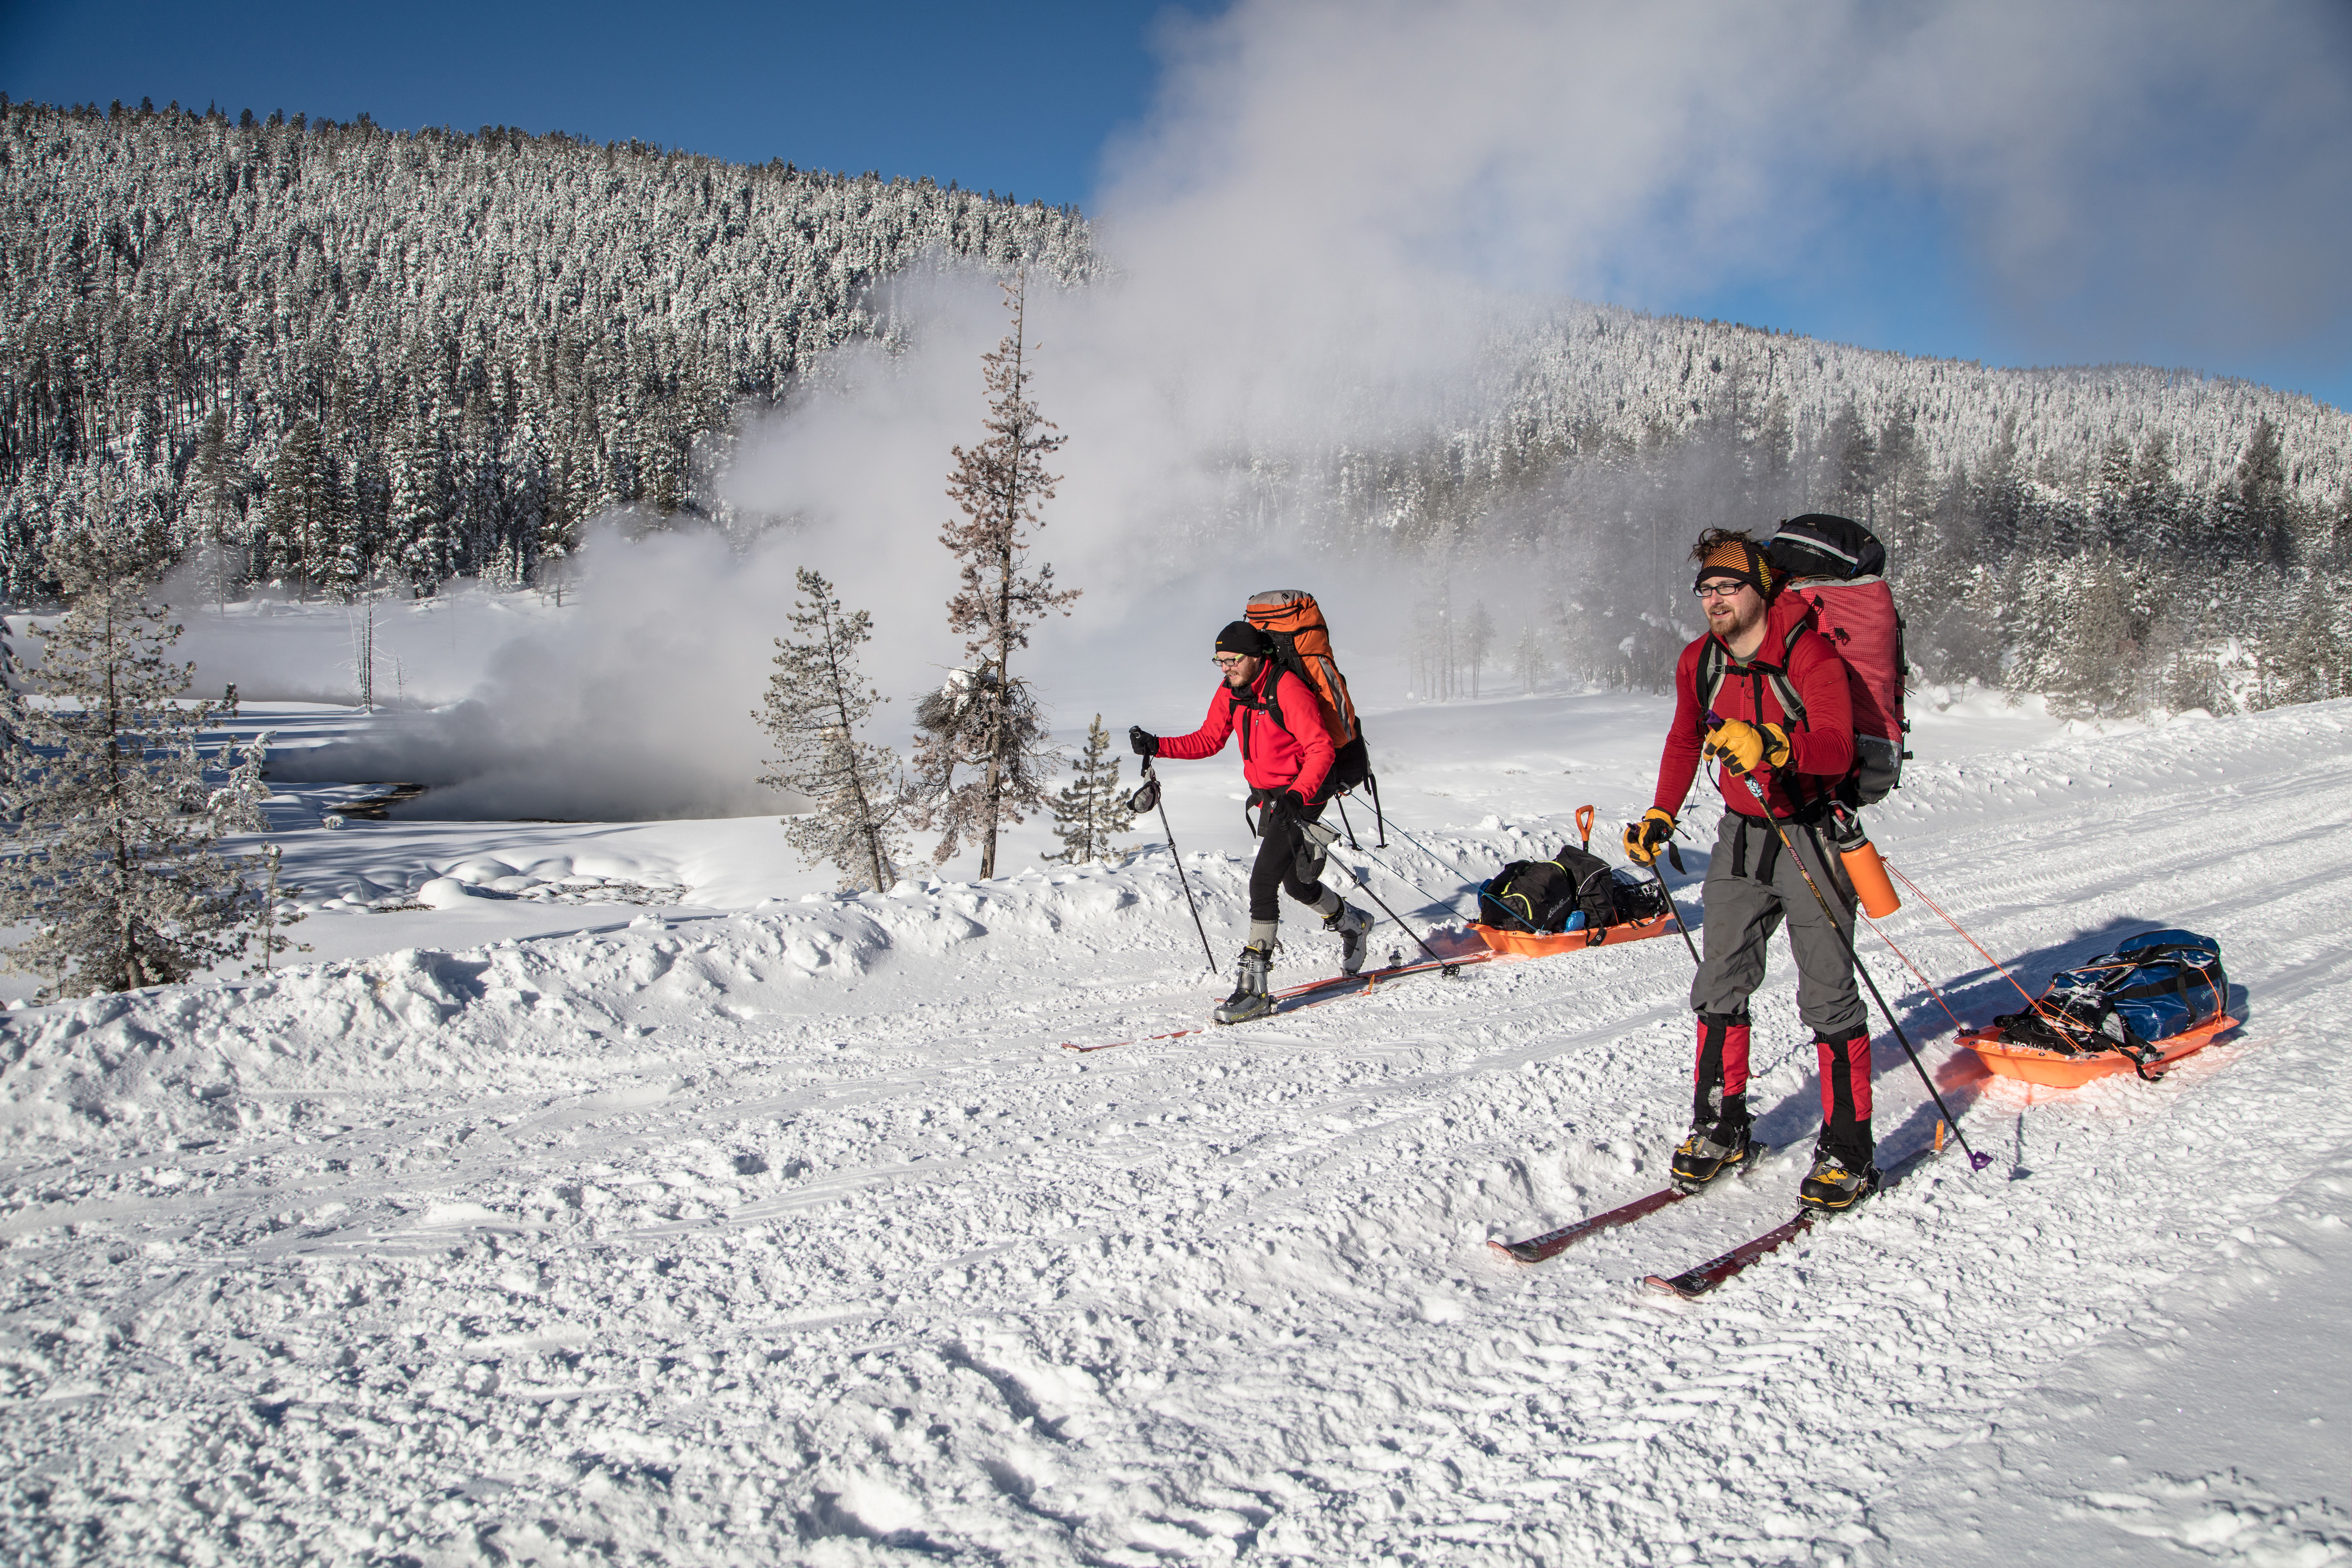 Two skiers with backpacks pulling sleds on a groomed road with steam rising in background